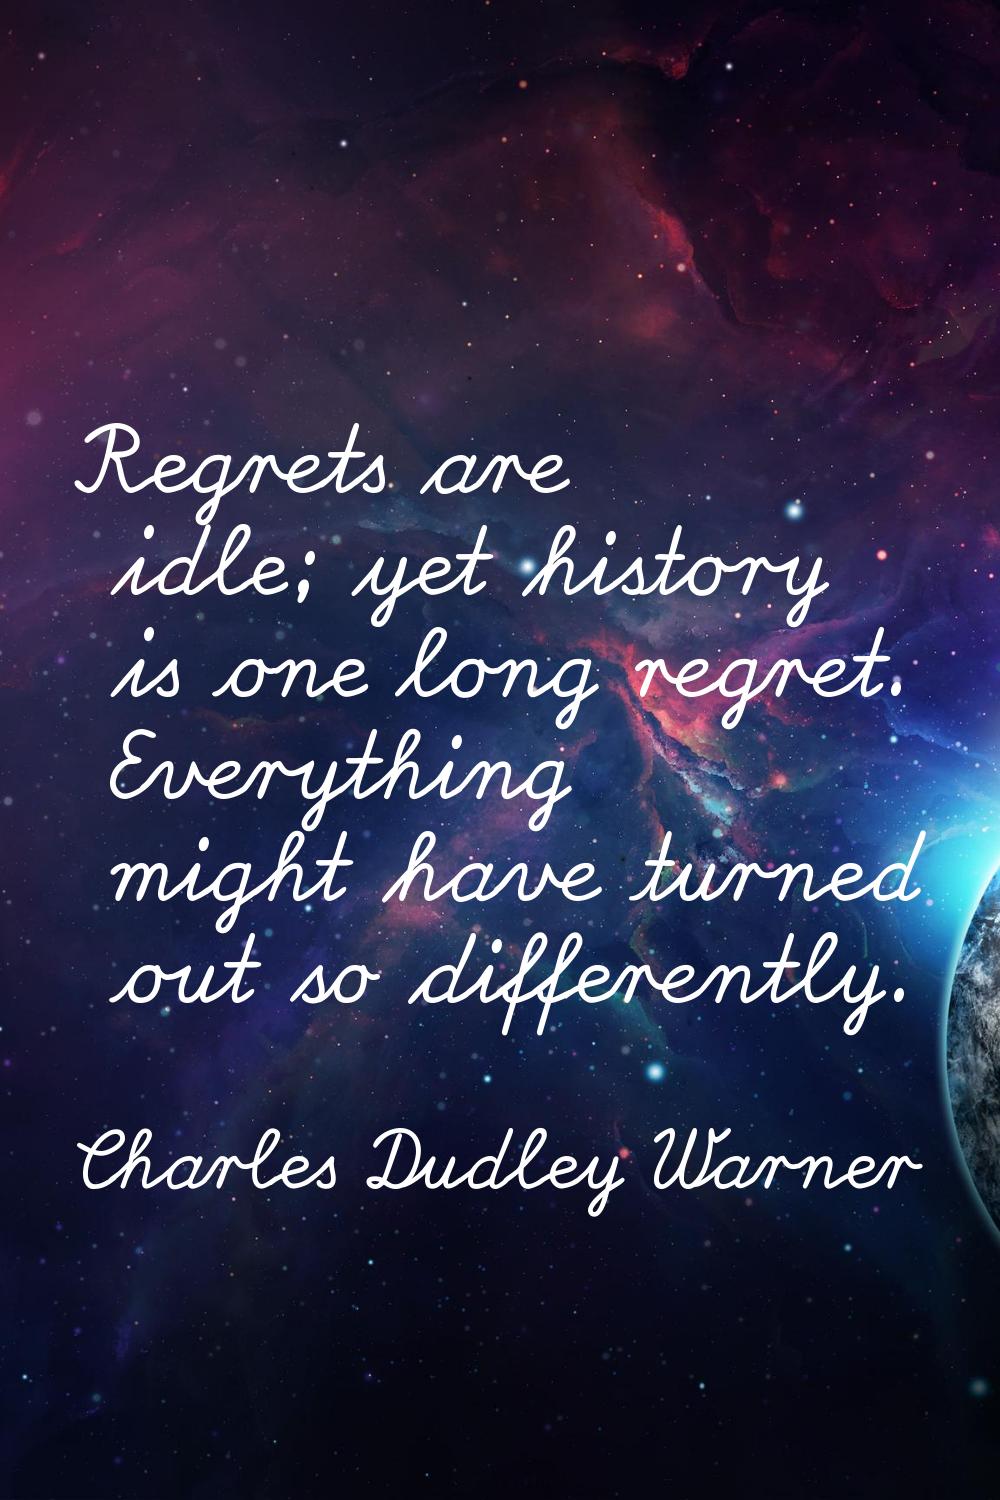 Regrets are idle; yet history is one long regret. Everything might have turned out so differently.